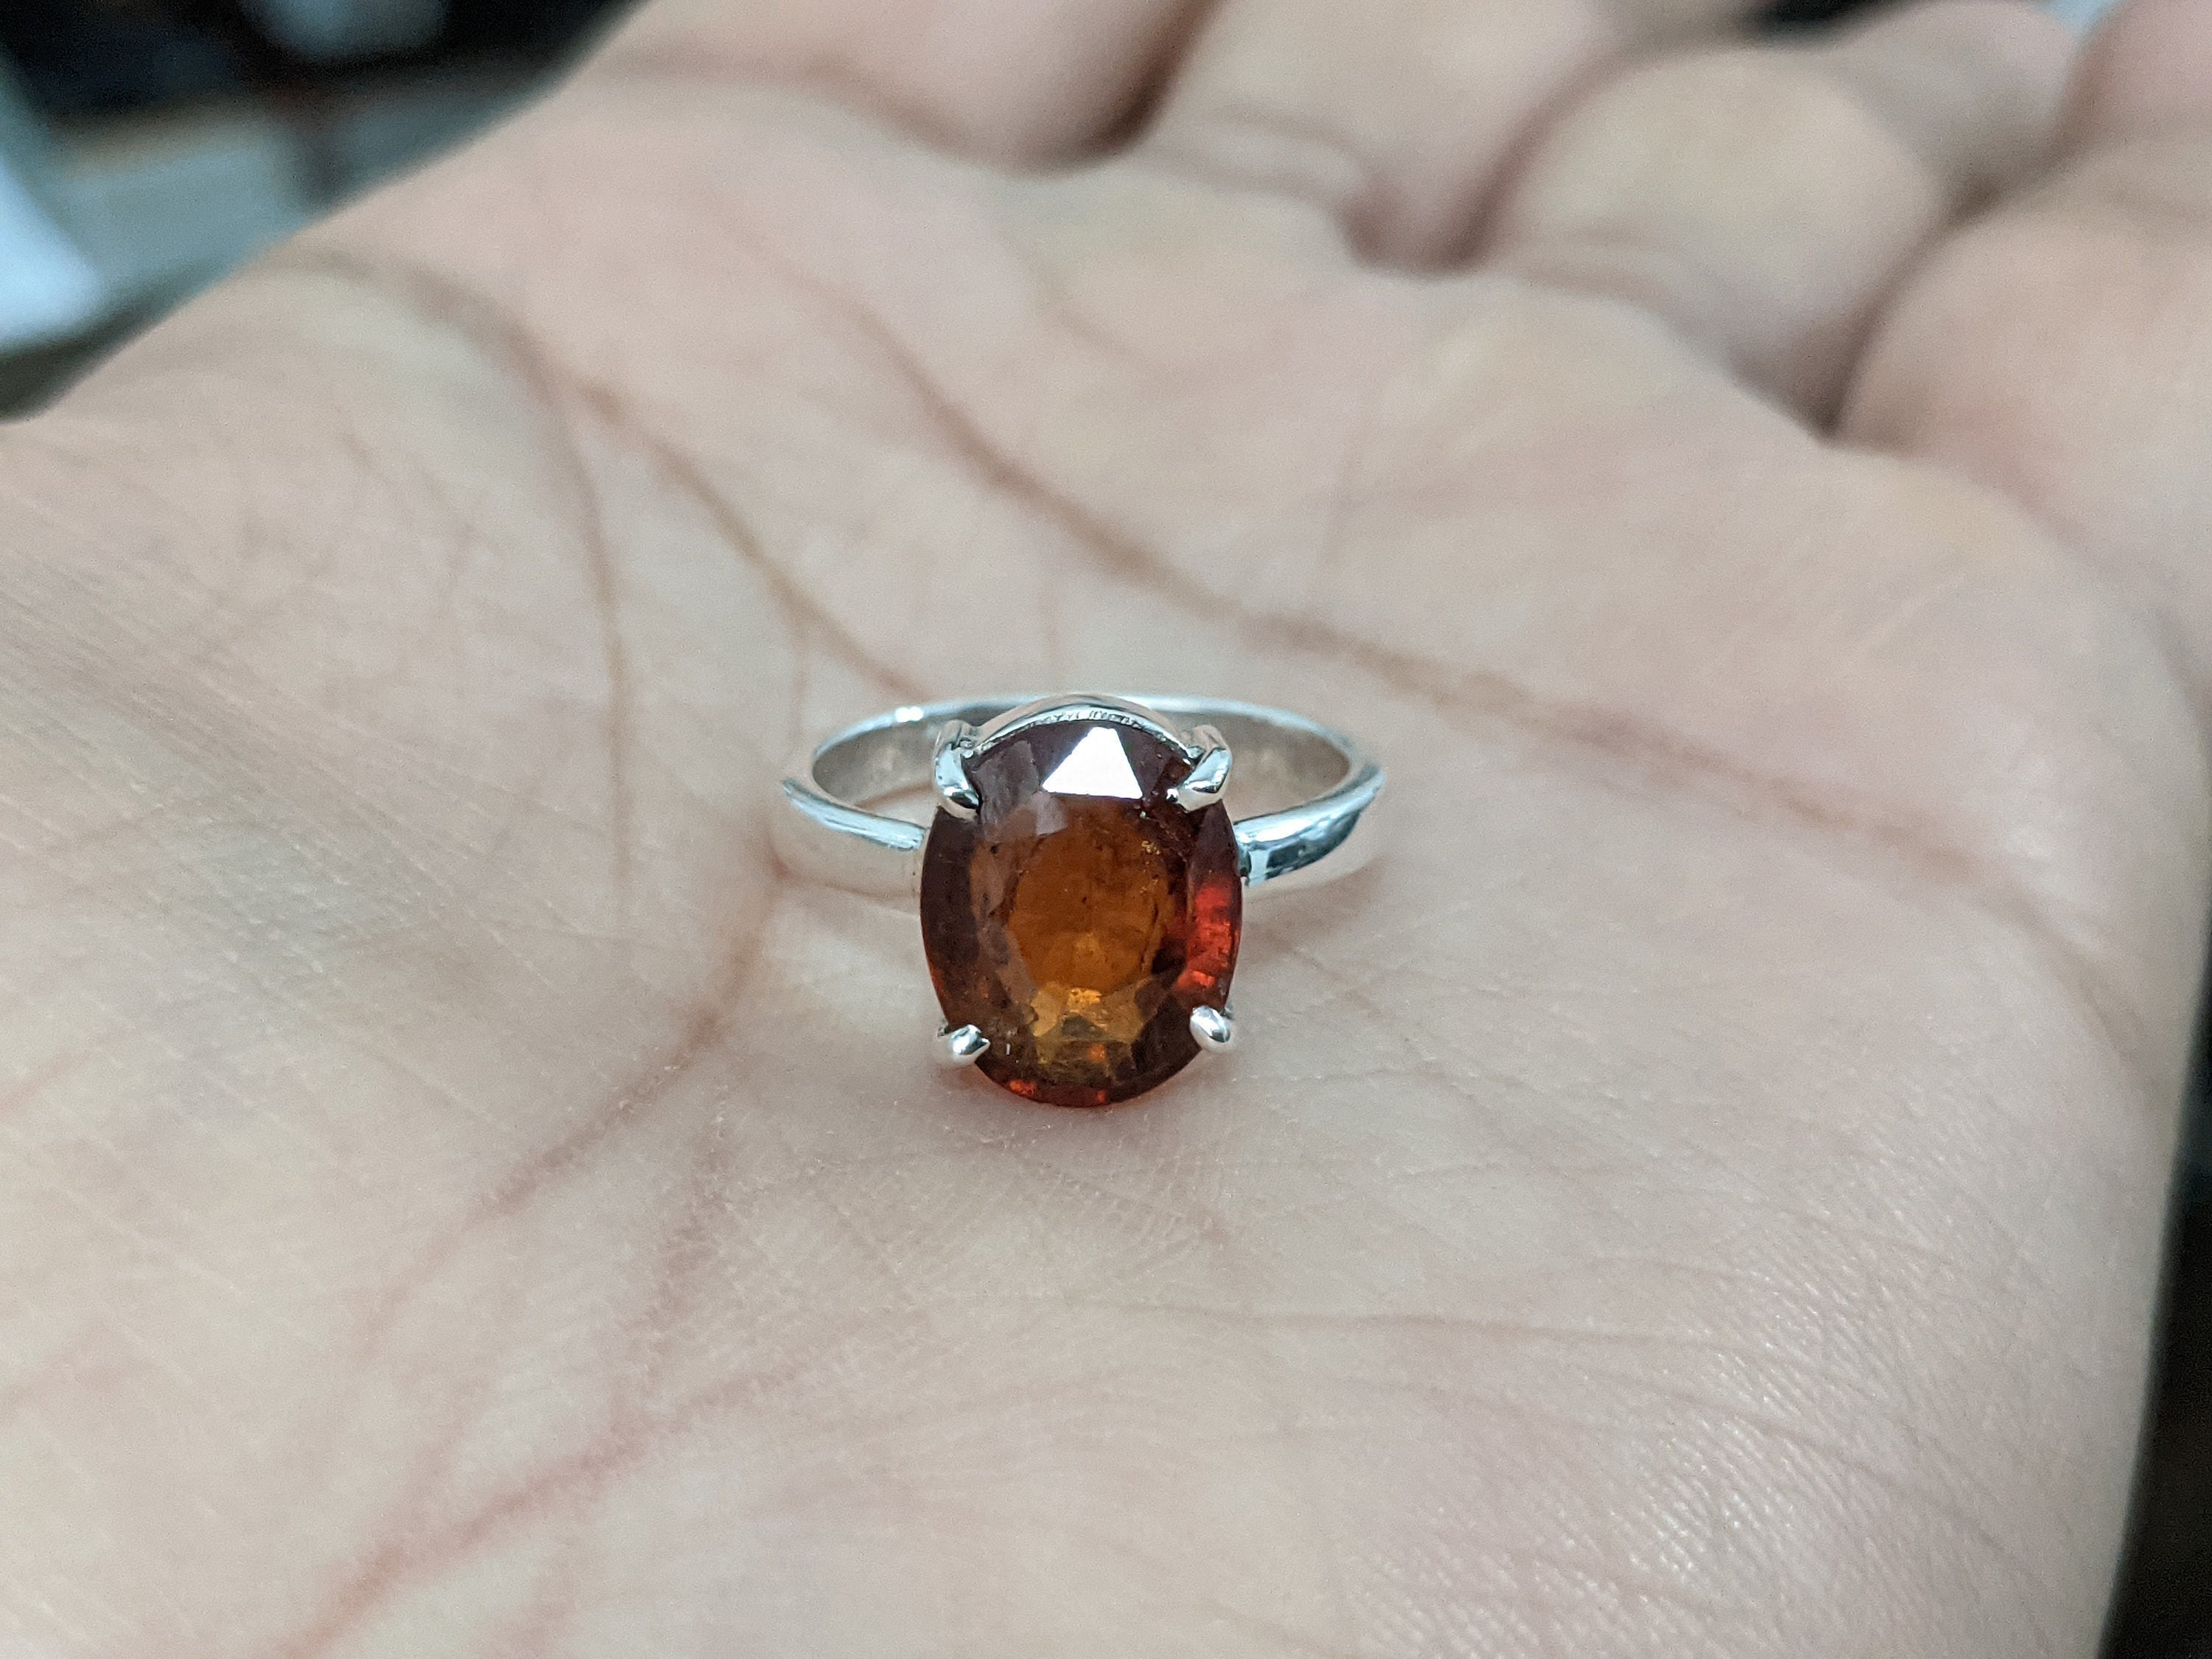 Amazon.com: 6.50 CARAT Gomedhikam 100% Natural Hessonite Ceylon Gomed Stone  with Lab Certified hessonite Garnet Silver Ring By Kartik Gems : Clothing,  Shoes & Jewelry